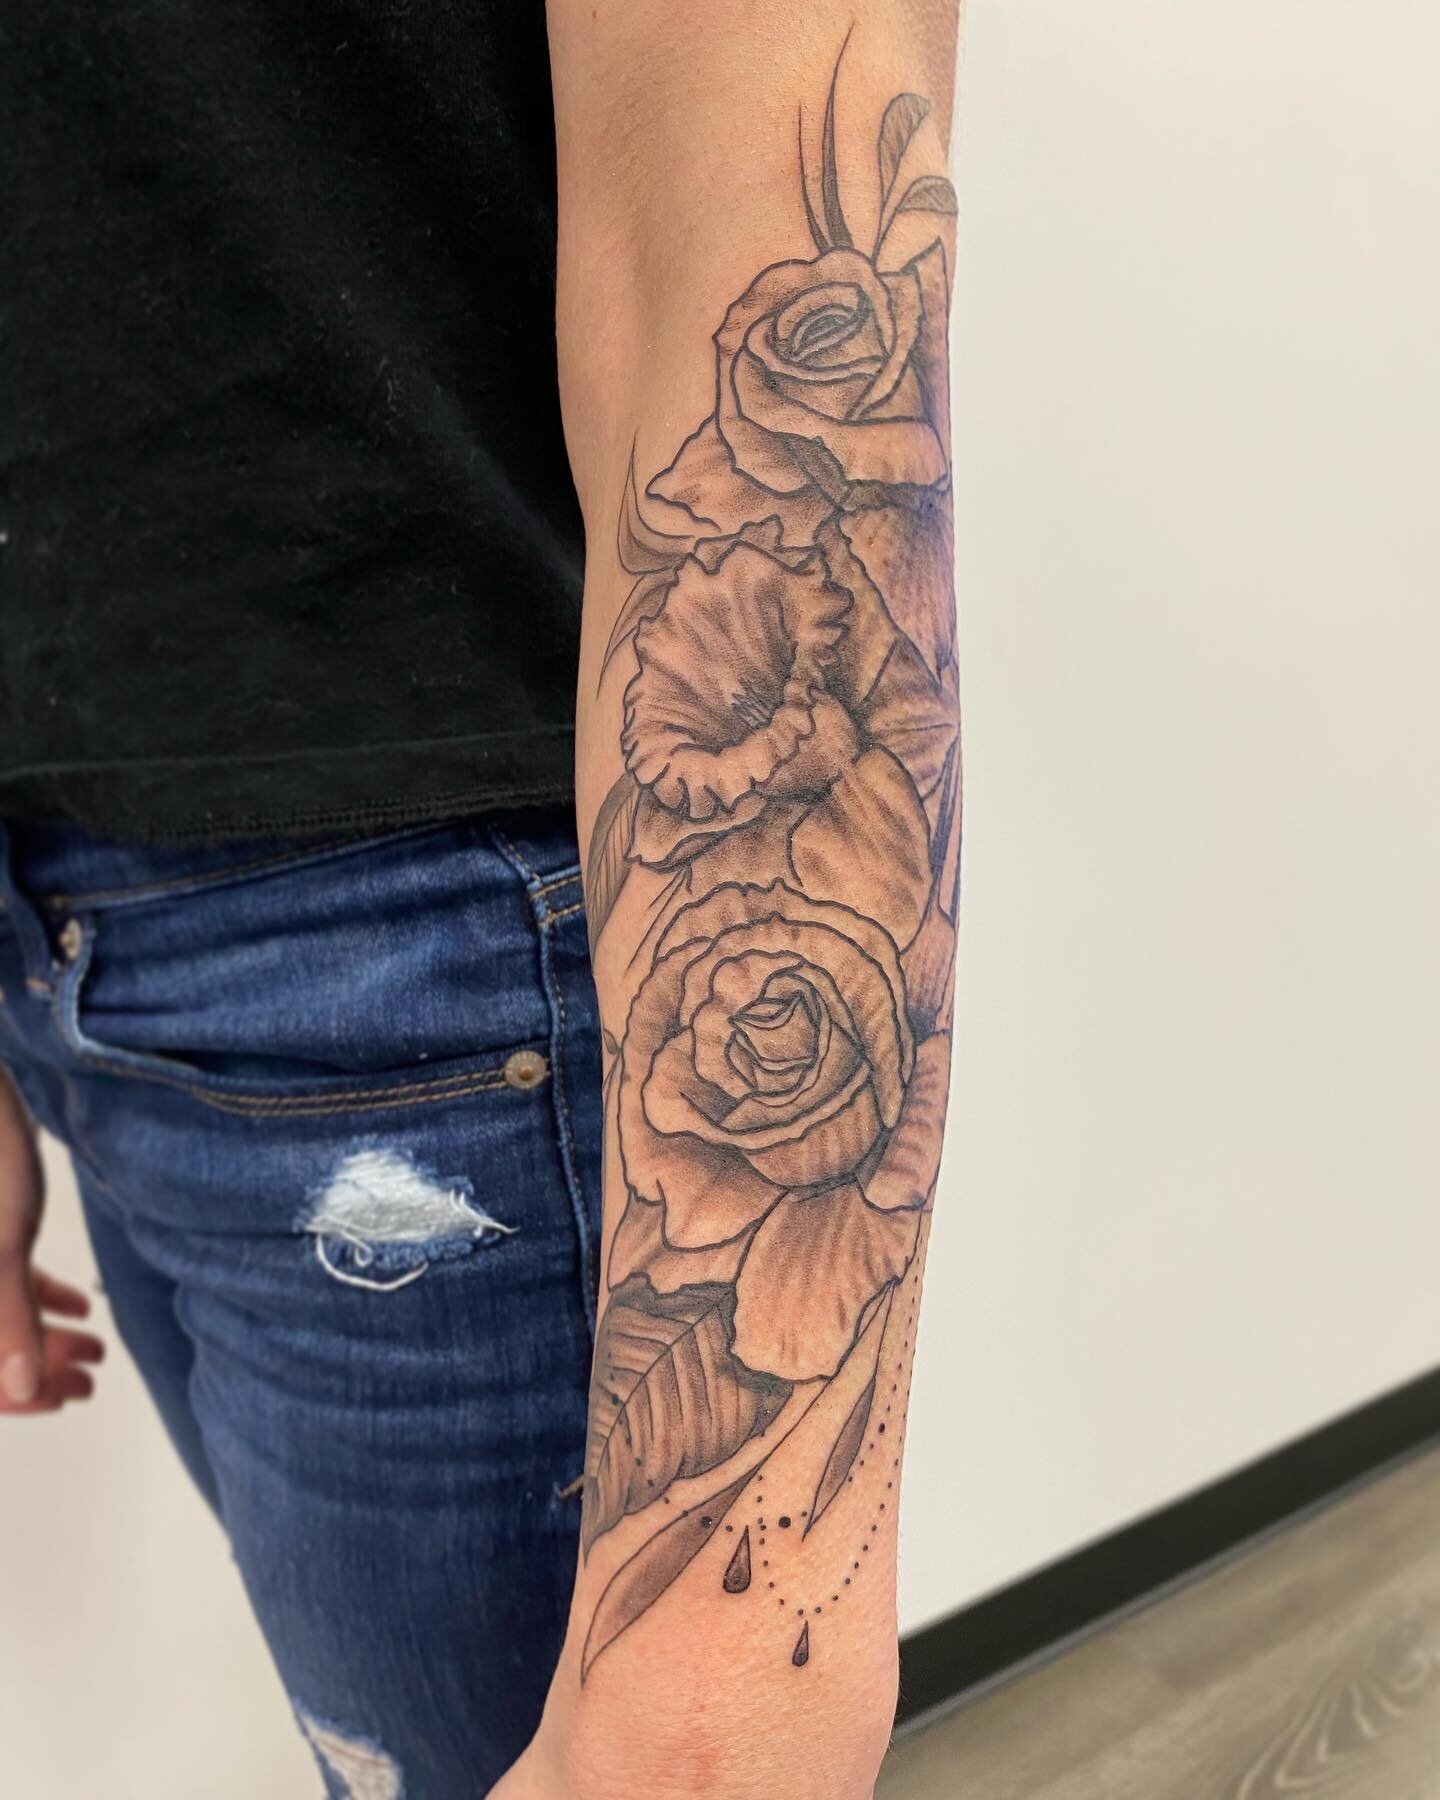 Get tattoos from me so I can save up for my Tesla Cybertruck by buying Bitcoin and Silver #theedgetattoo #theedgetattooct #southWindsor #manchesterct #flowertattoo #floraltattoo #cttattooartists #tattoos #inkedup #drawing #tatoo #tattooing #tattoo #a